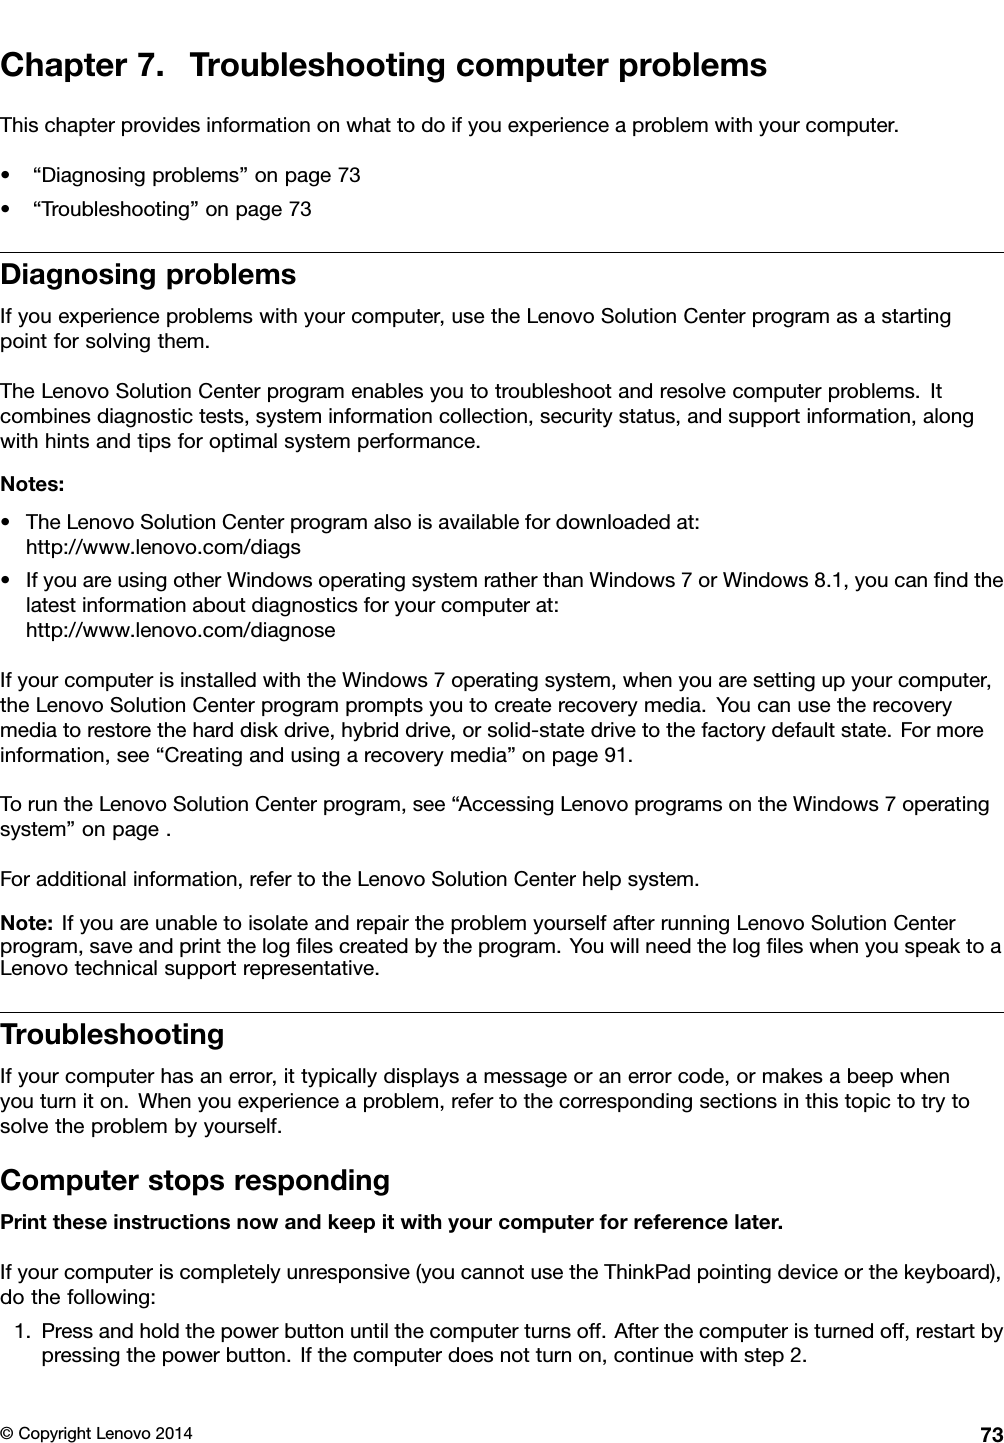 Chapter 7. Troubleshooting computer problemsThis chapter provides information on what to do if you experience a problem with your computer.• “Diagnosing problems” on page 73• “Troubleshooting” on page 73Diagnosing problemsIf you experience problems with your computer, use the Lenovo Solution Center program as a startingpoint for solving them.The Lenovo Solution Center program enables you to troubleshoot and resolve computer problems. Itcombines diagnostic tests, system information collection, security status, and support information, alongwith hints and tips for optimal system performance.Notes:• The Lenovo Solution Center program also is available for downloaded at:http://www.lenovo.com/diags• If you are using other Windows operating system rather than Windows 7 or Windows 8.1, you can ﬁnd thelatest information about diagnostics for your computer at:http://www.lenovo.com/diagnoseIf your computer is installed with the Windows 7 operating system, when you are setting up your computer,the Lenovo Solution Center program prompts you to create recovery media. You can use the recoverymedia to restore the hard disk drive, hybrid drive, or solid-state drive to the factory default state. For moreinformation, see “Creating and using a recovery media” on page 91.To run the Lenovo Solution Center program, see “Accessing Lenovo programs on the Windows 7 operatingsystem” on page .For additional information, refer to the Lenovo Solution Center help system.Note: If you are unable to isolate and repair the problem yourself after running Lenovo Solution Centerprogram, save and print the log ﬁles created by the program. You will need the log ﬁles when you speak to aLenovo technical support representative.TroubleshootingIf your computer has an error, it typically displays a message or an error code, or makes a beep whenyou turn it on. When you experience a problem, refer to the corresponding sections in this topic to try tosolve the problem by yourself.Computer stops respondingPrint these instructions now and keep it with your computer for reference later.If your computer is completely unresponsive (you cannot use the ThinkPad pointing device or the keyboard),do the following:1. Press and hold the power button until the computer turns off. After the computer is turned off, restart bypressing the power button. If the computer does not turn on, continue with step 2.© Copyright Lenovo 2014 73